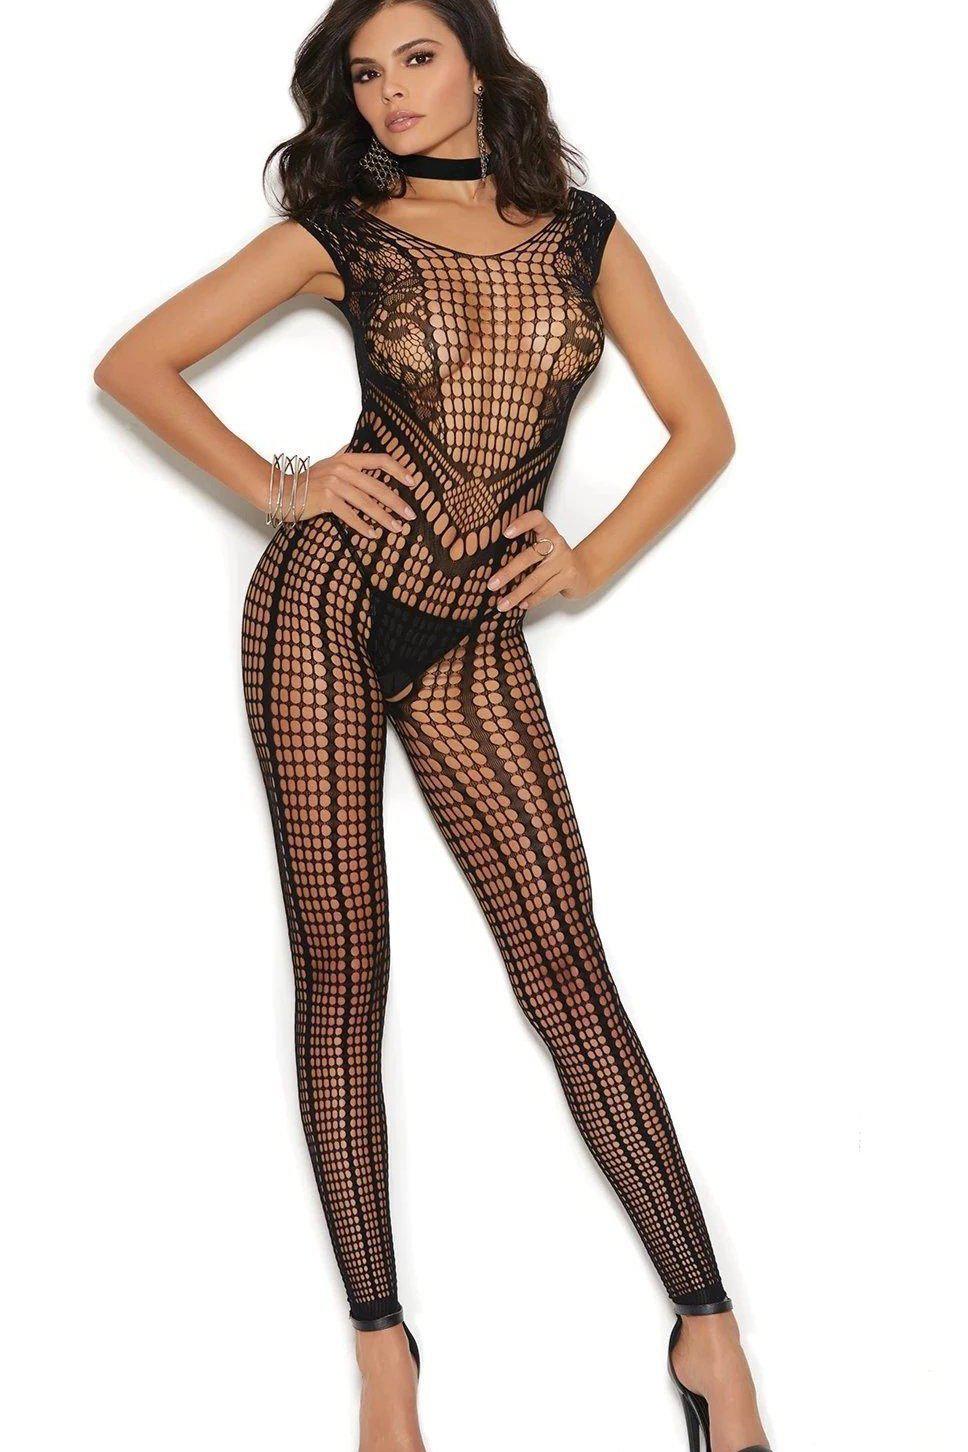 Footless Bodystocking-Elegant Moments-SEXYSHOES.COM